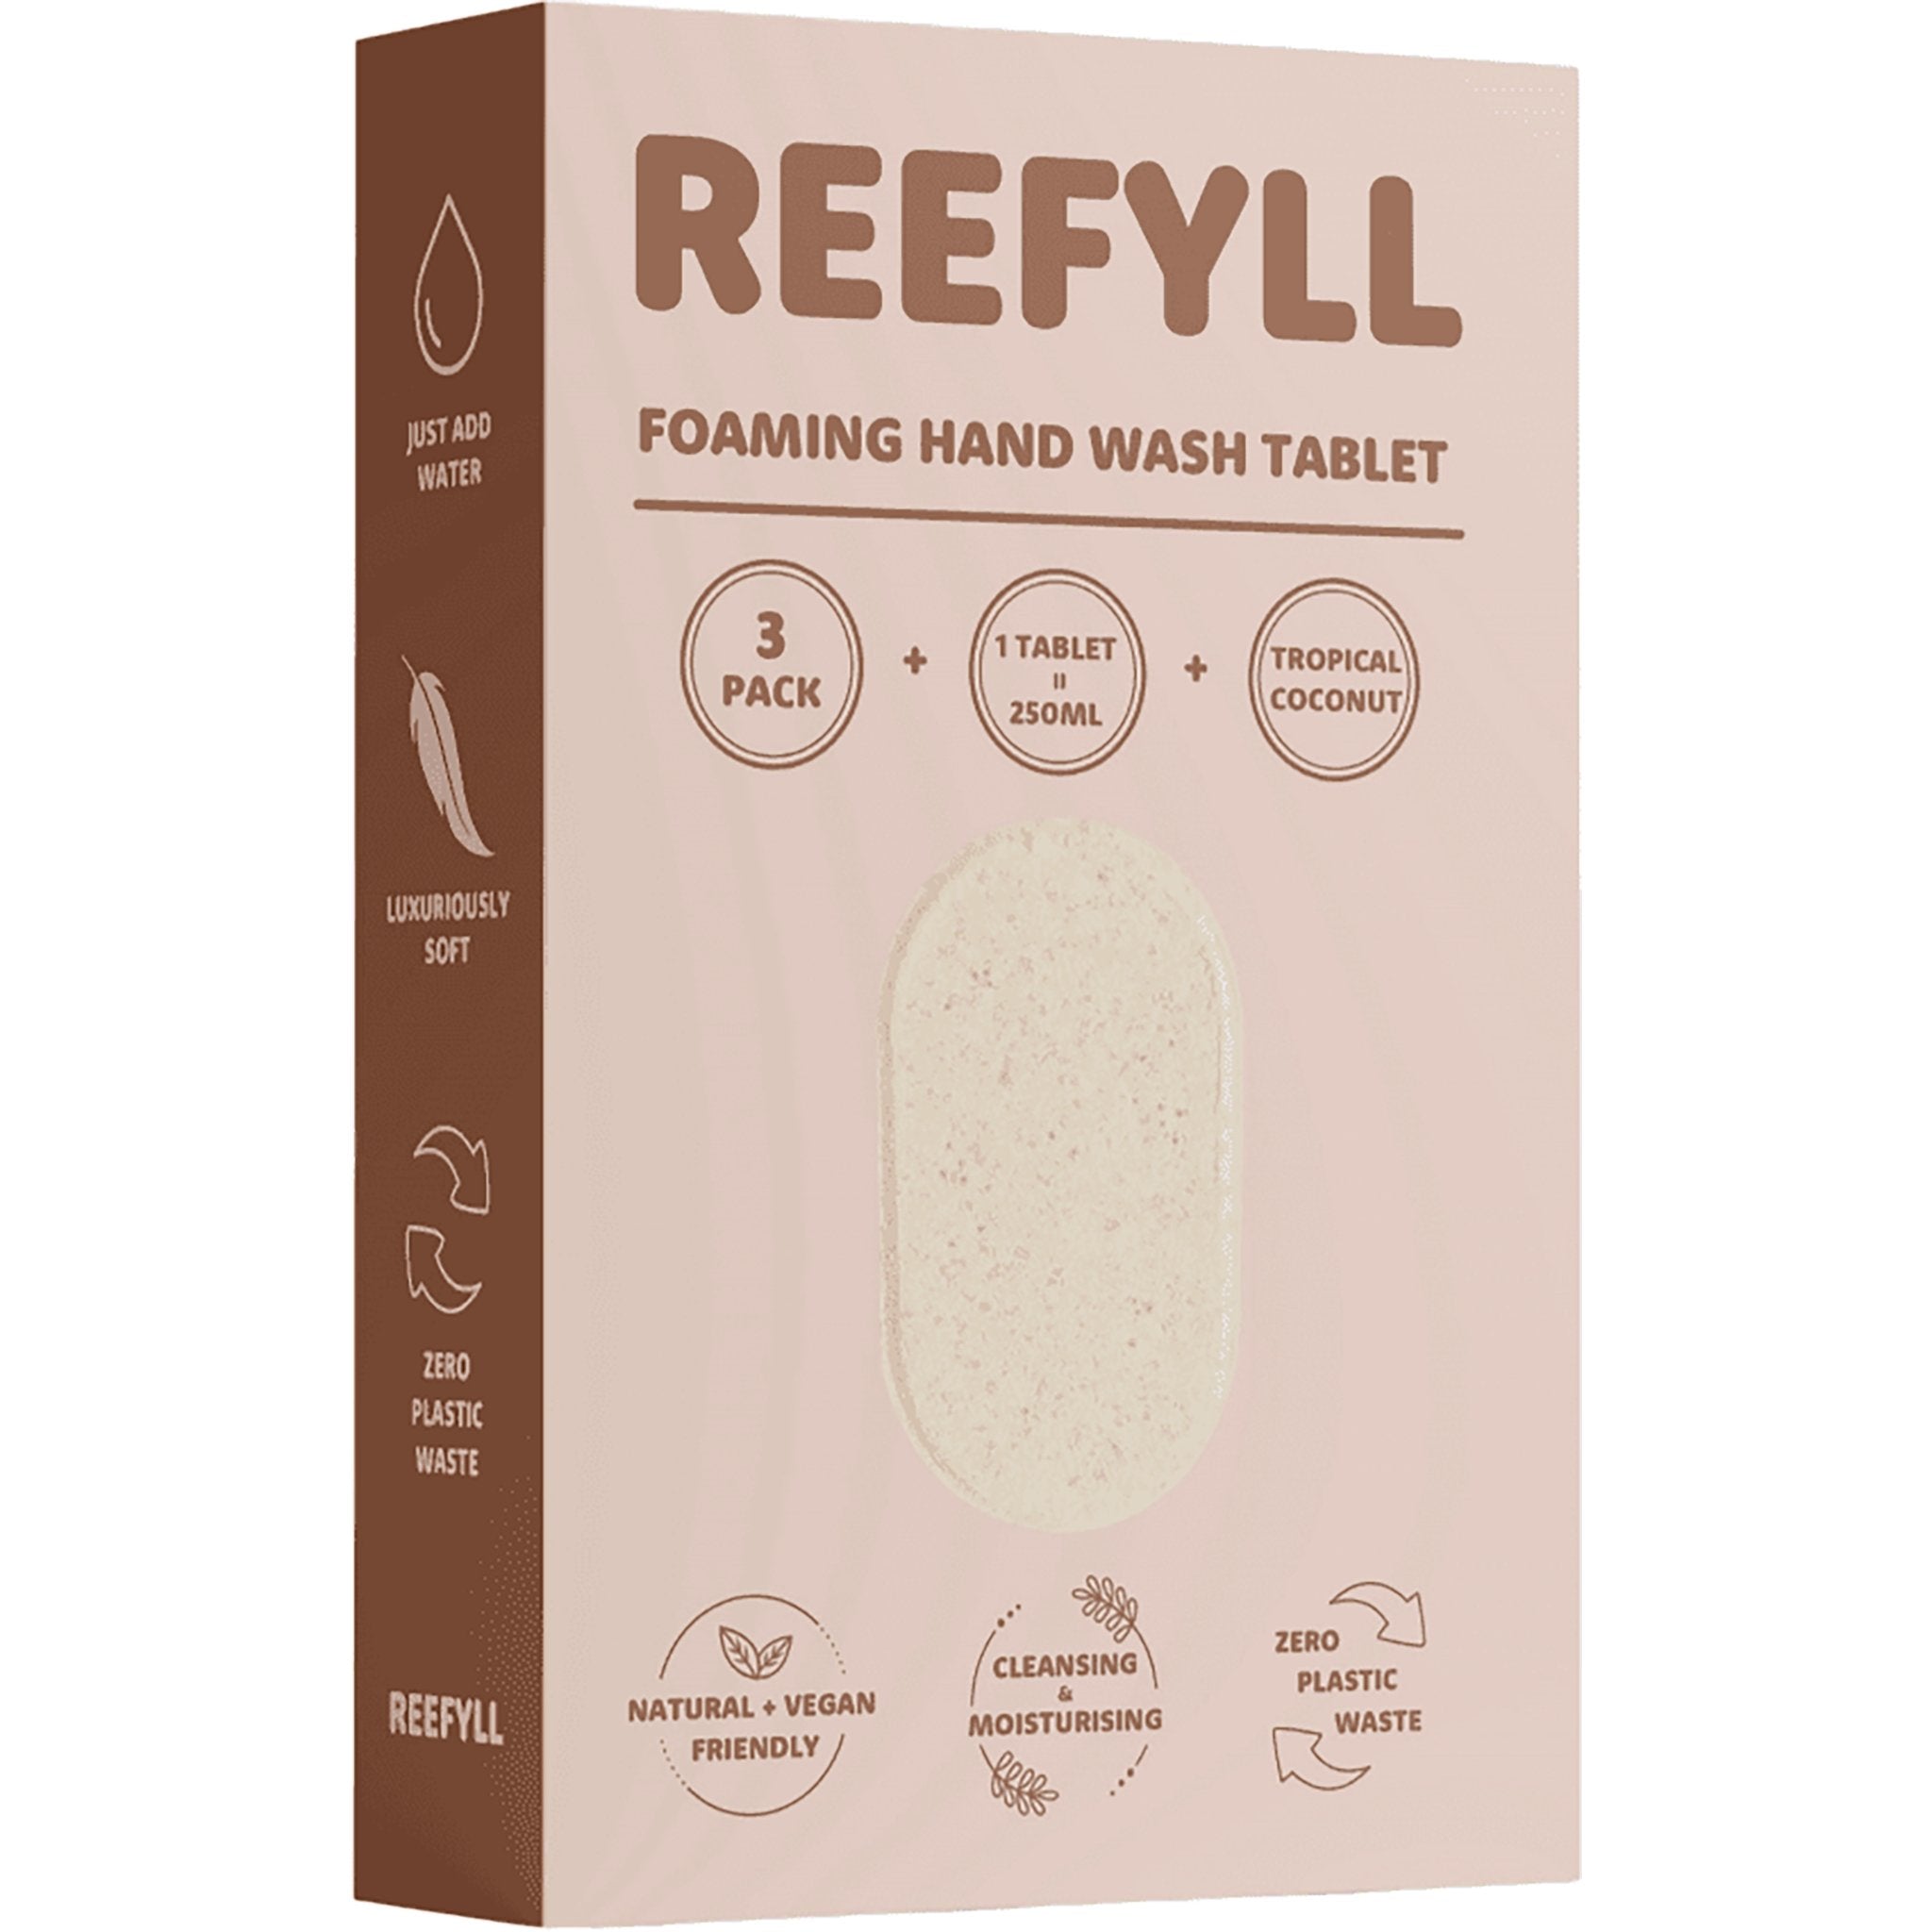 Foaming Hand Soap Refill Tablets - Tropical Coconut Scent - mypure.co.uk